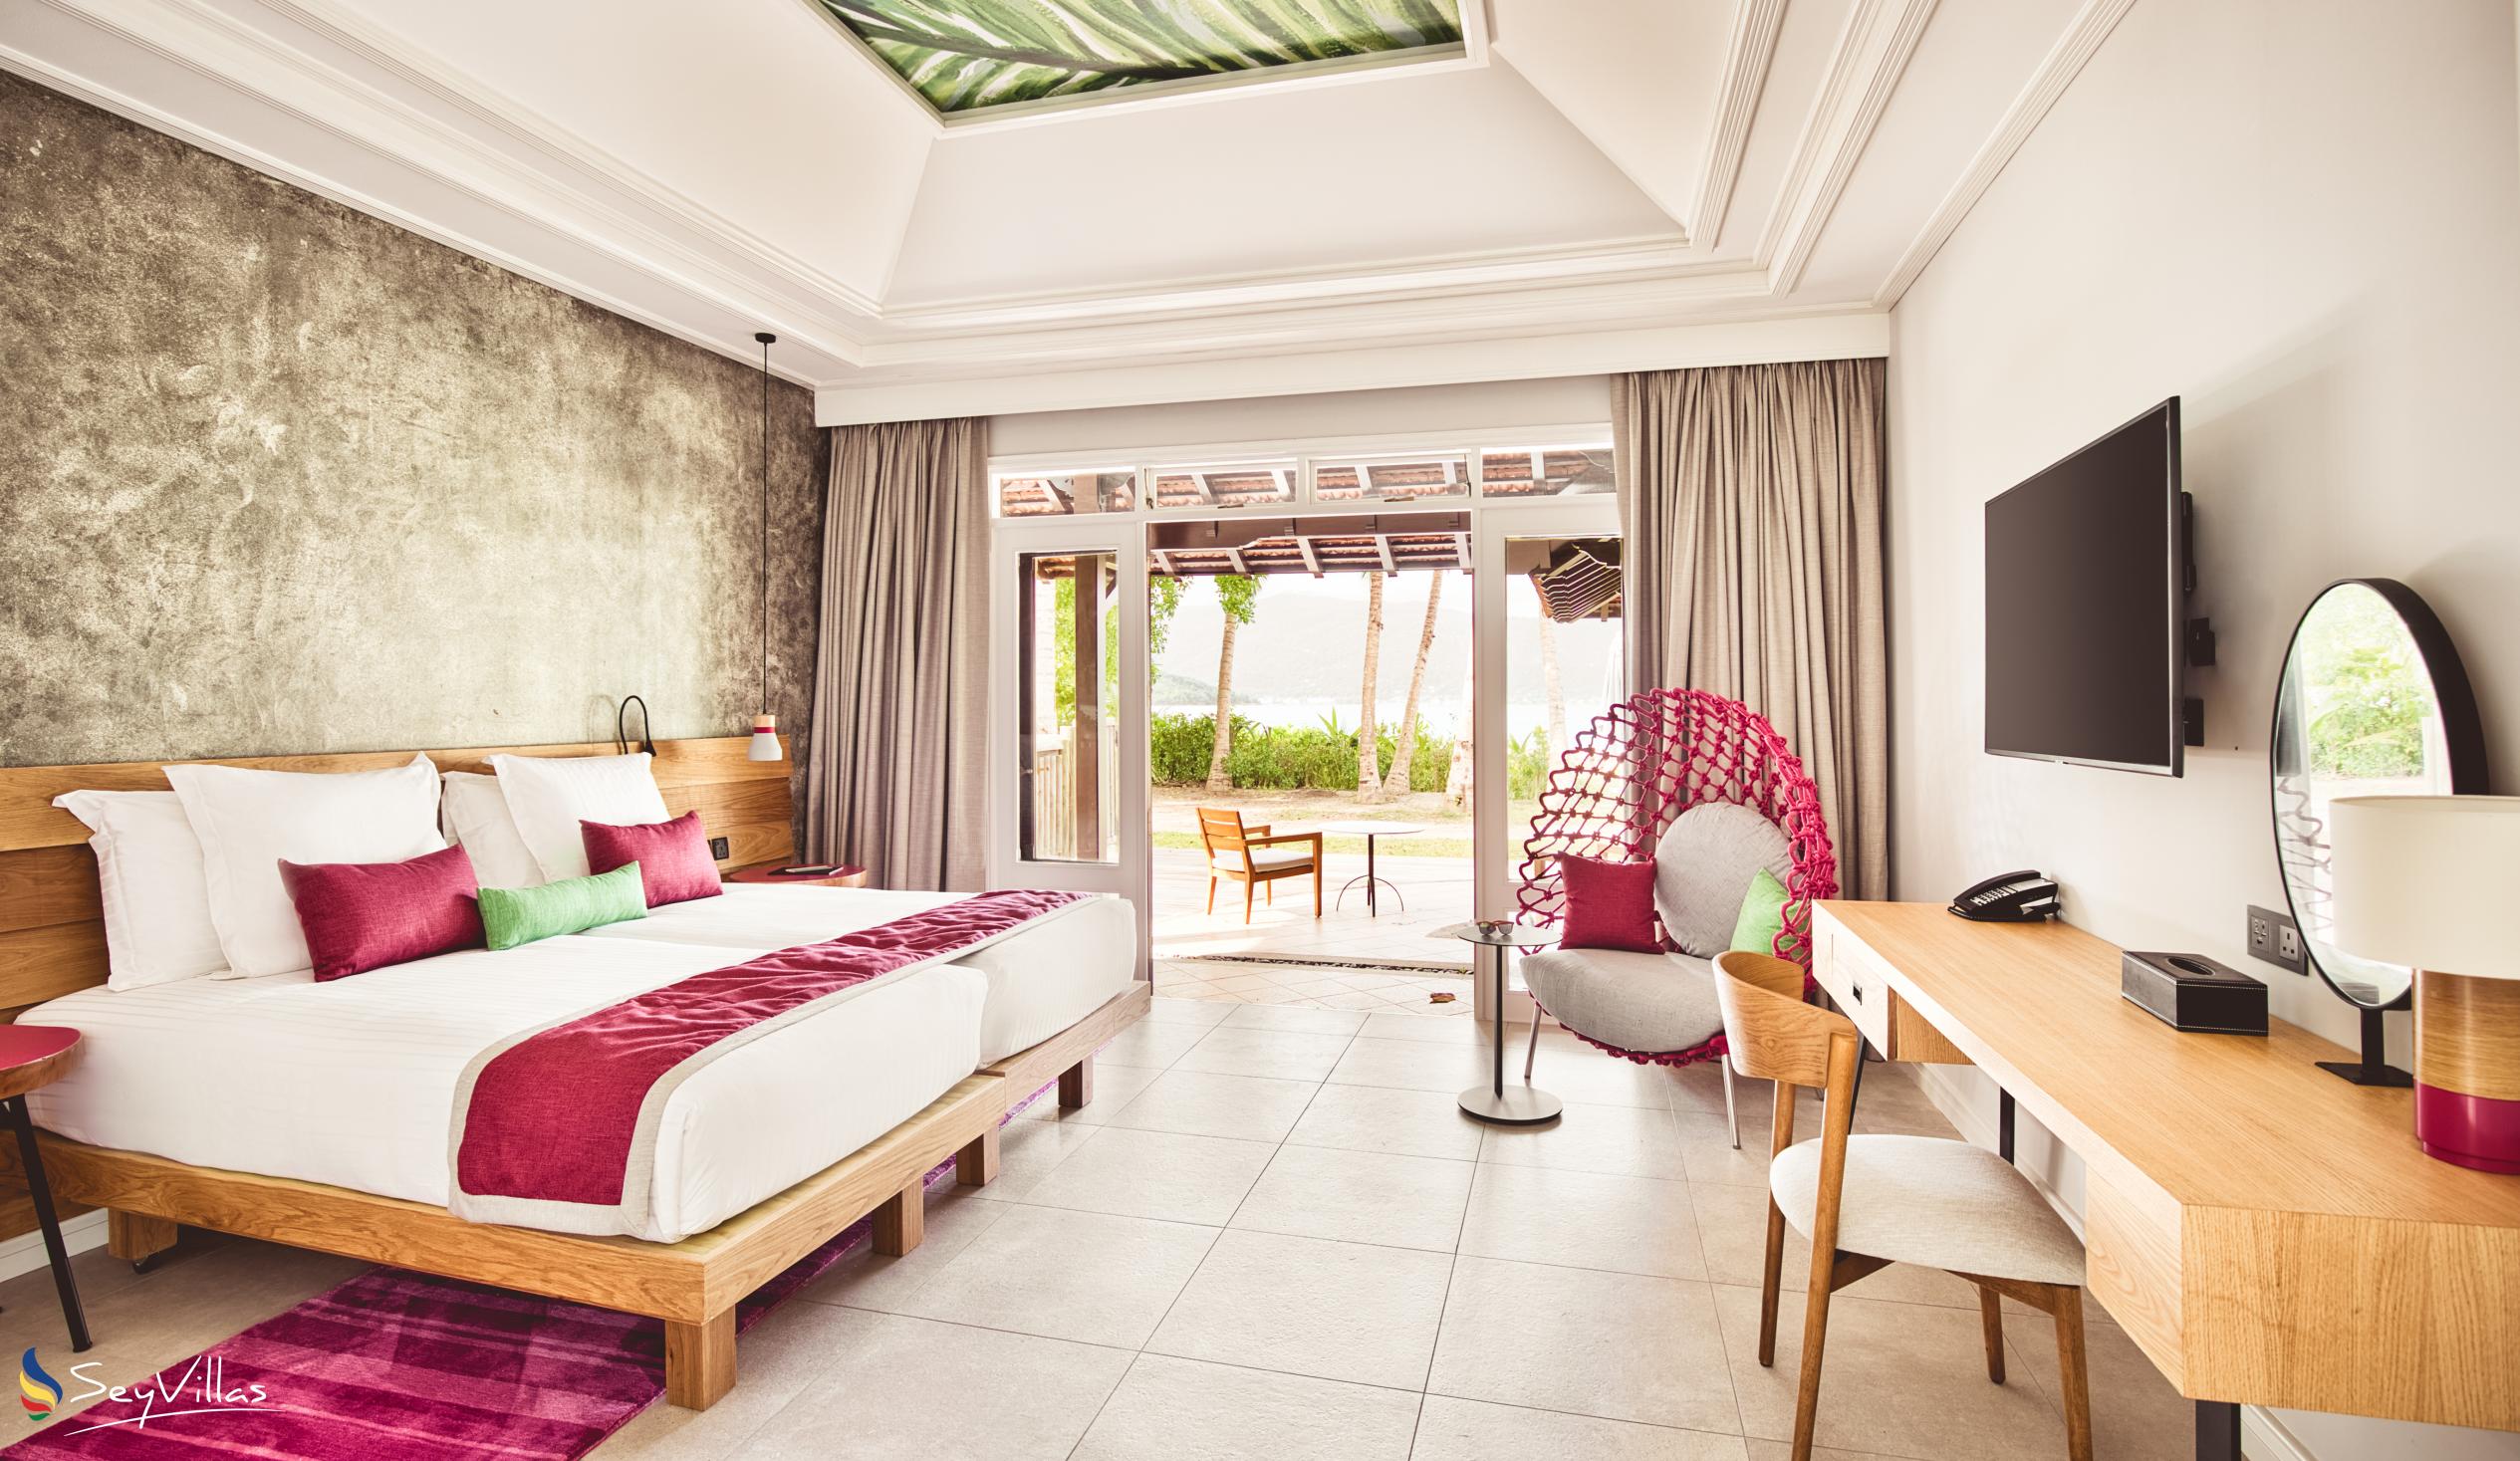 Photo 87: Club Med Seychelles - Family Suite with Private Pool - Saint Anne (Seychelles)